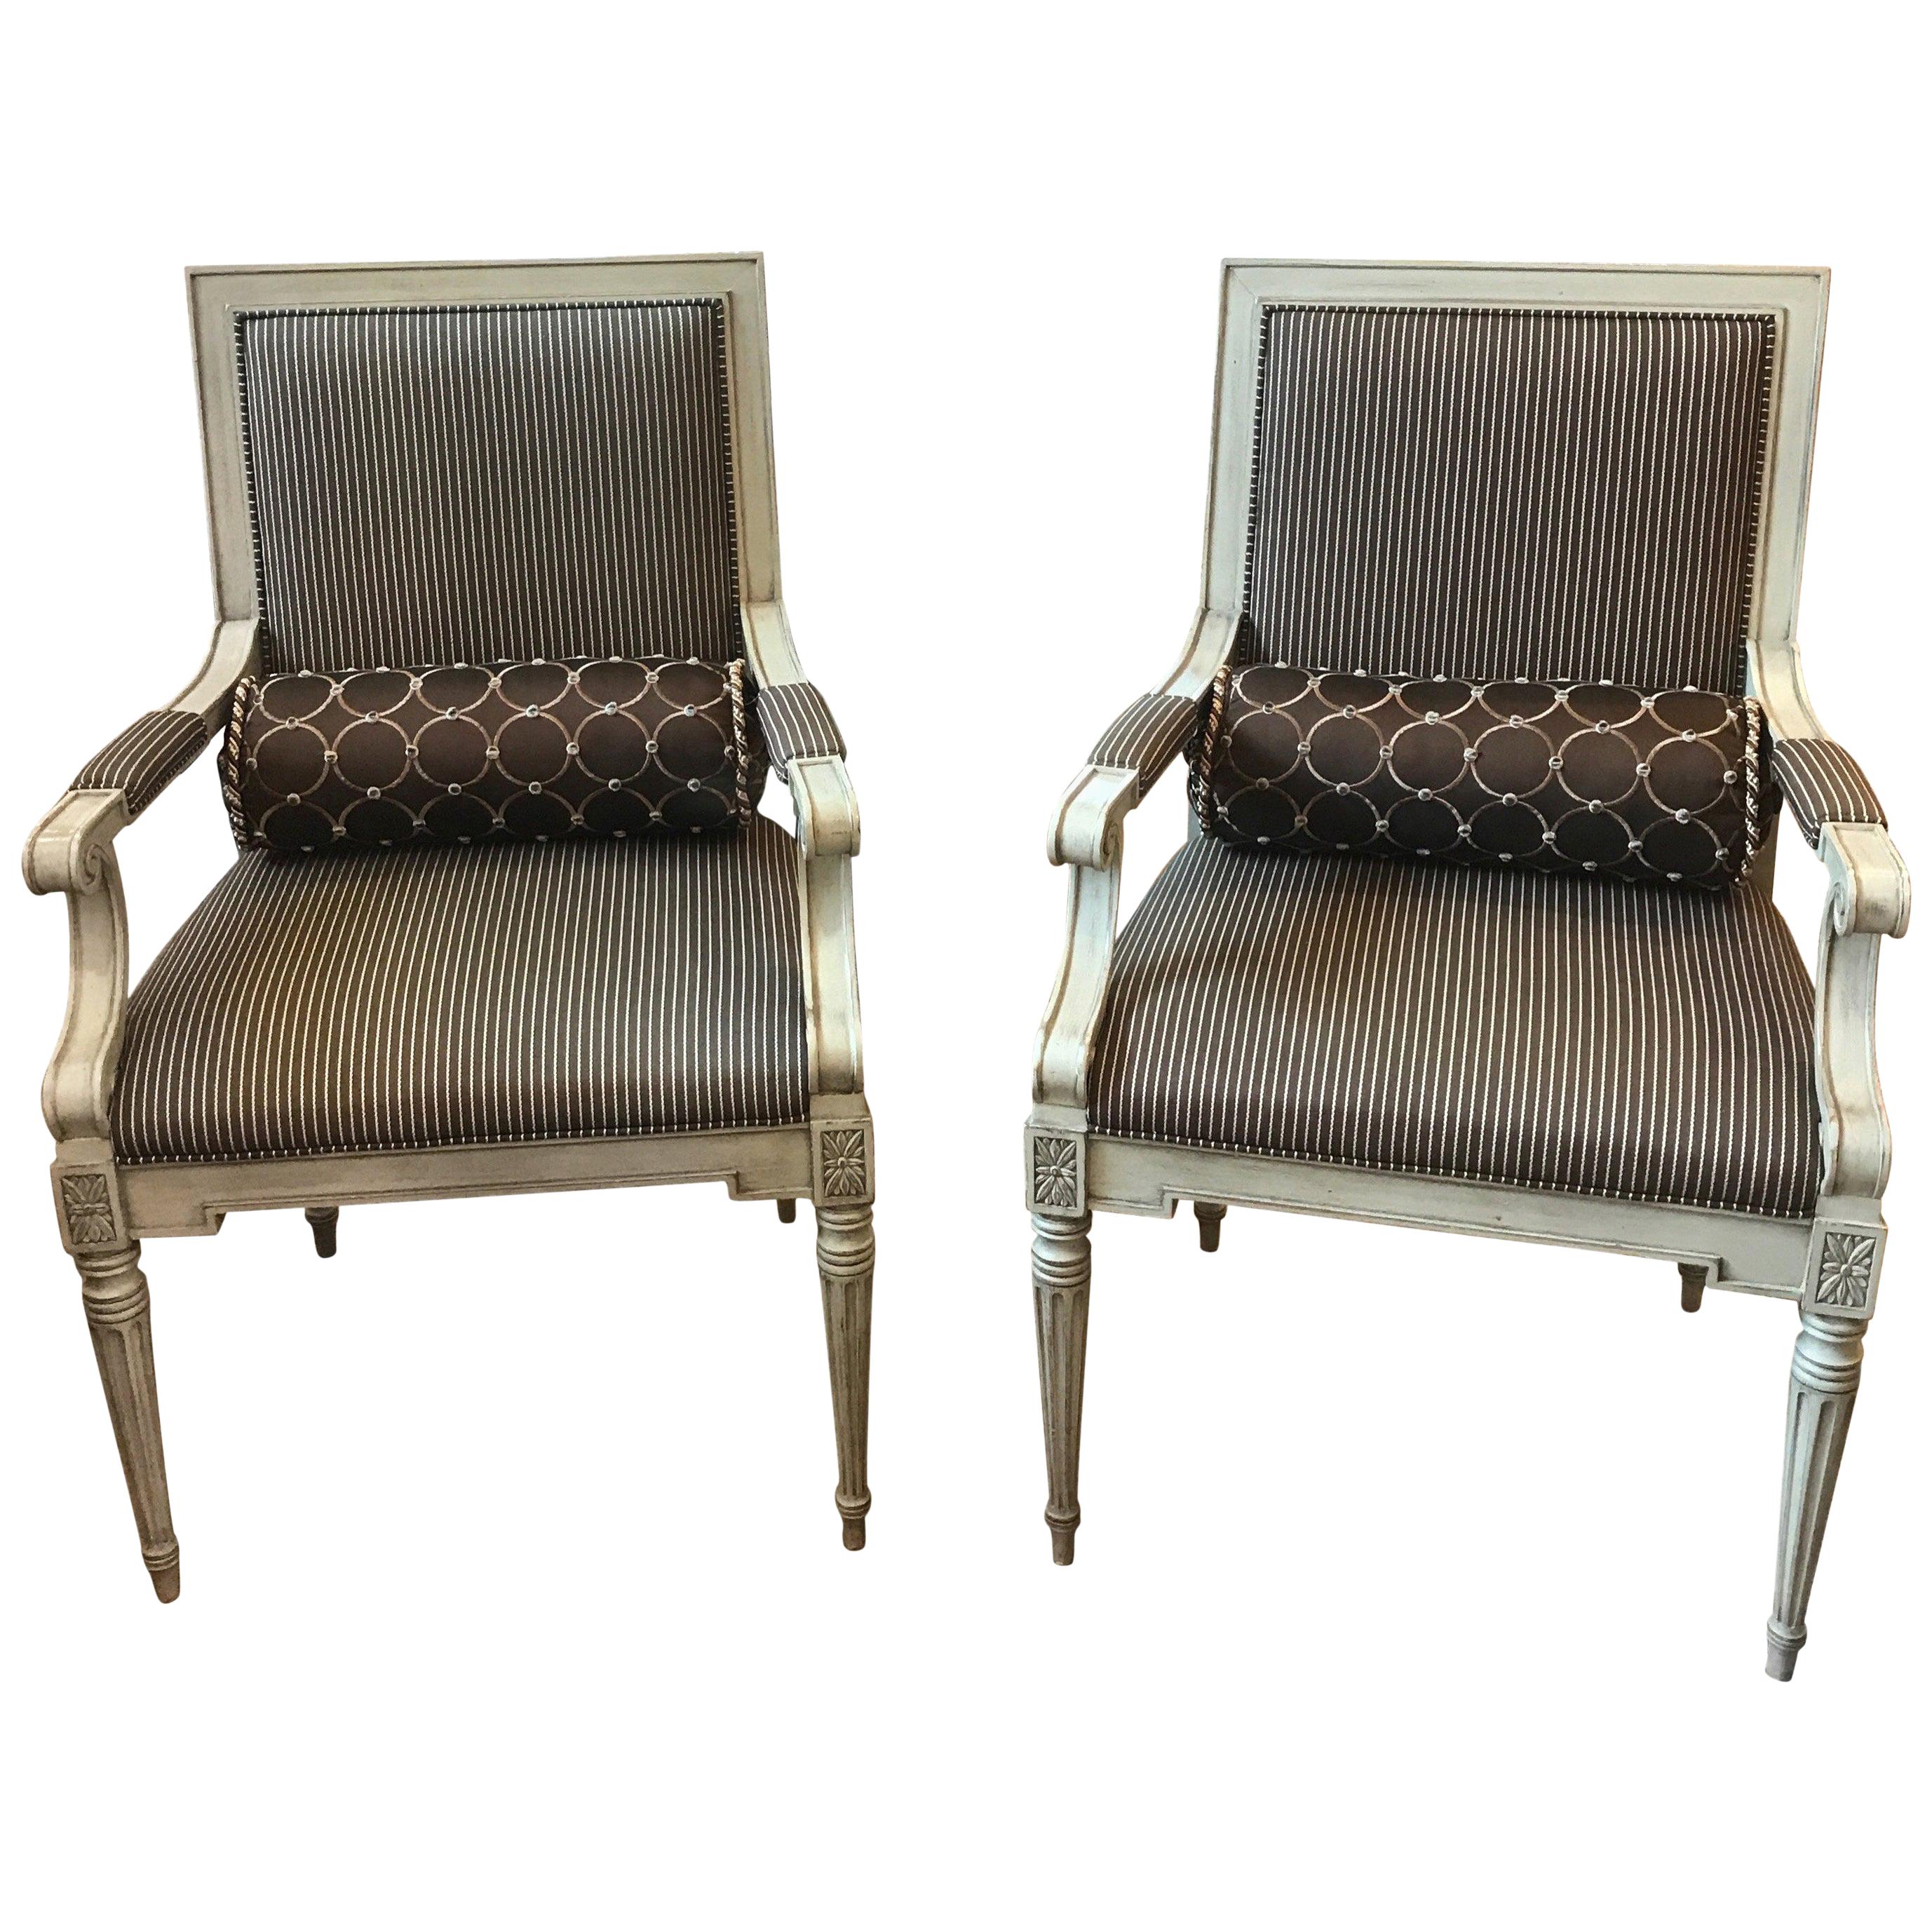 Pair of Painted Walnut Louis XVI Style Armchairs